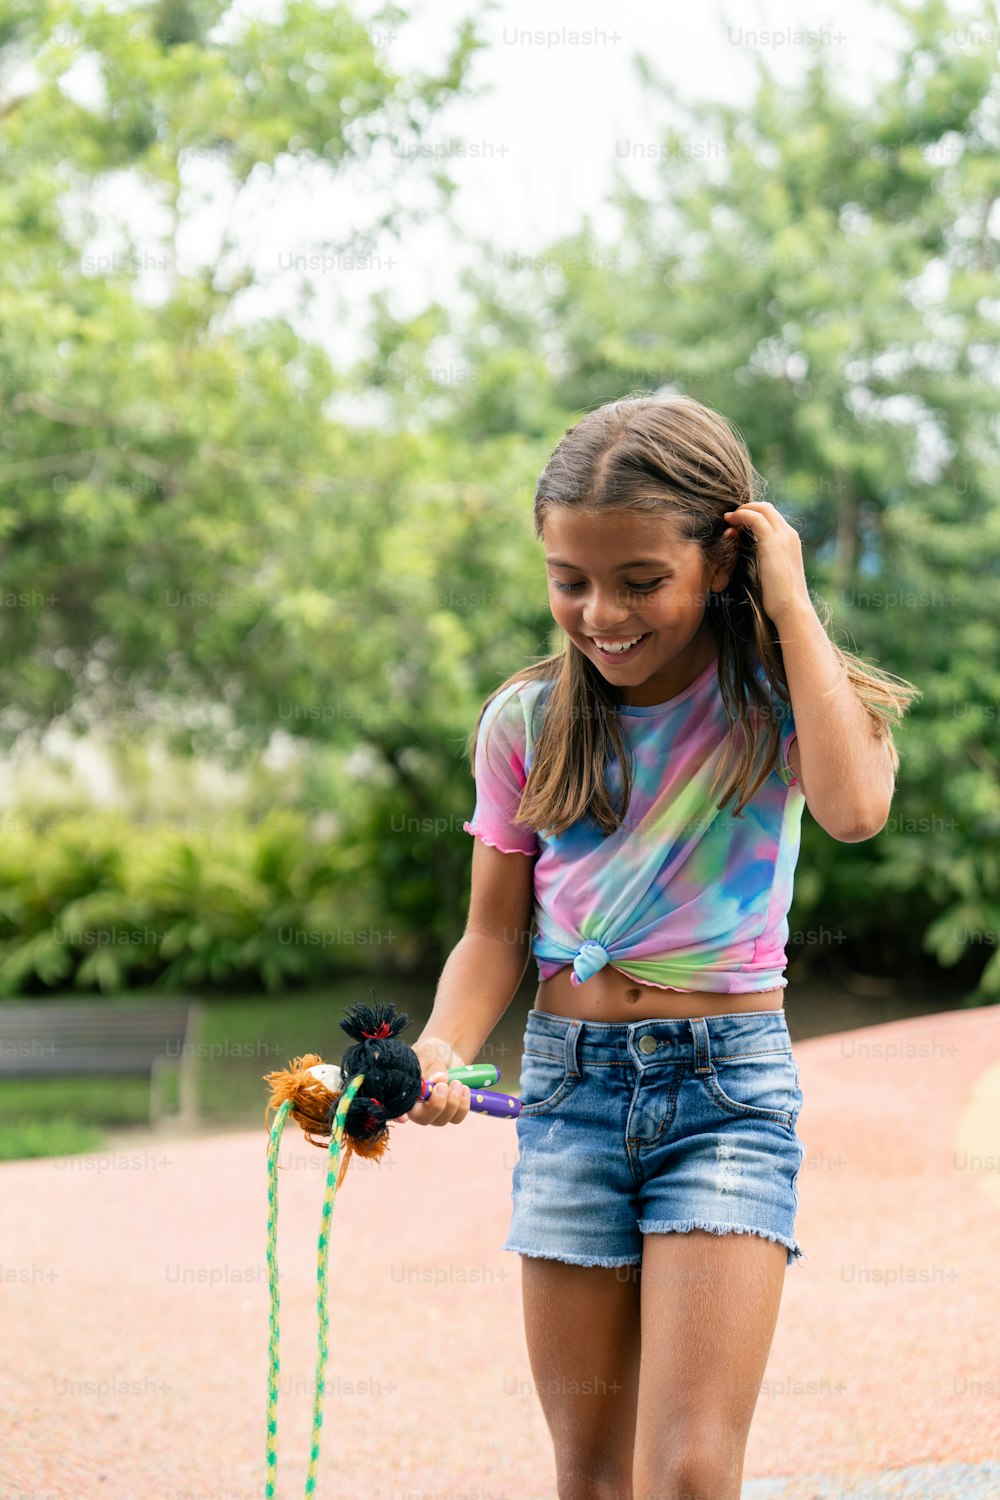 a girl in a tie dye shirt is holding a toy